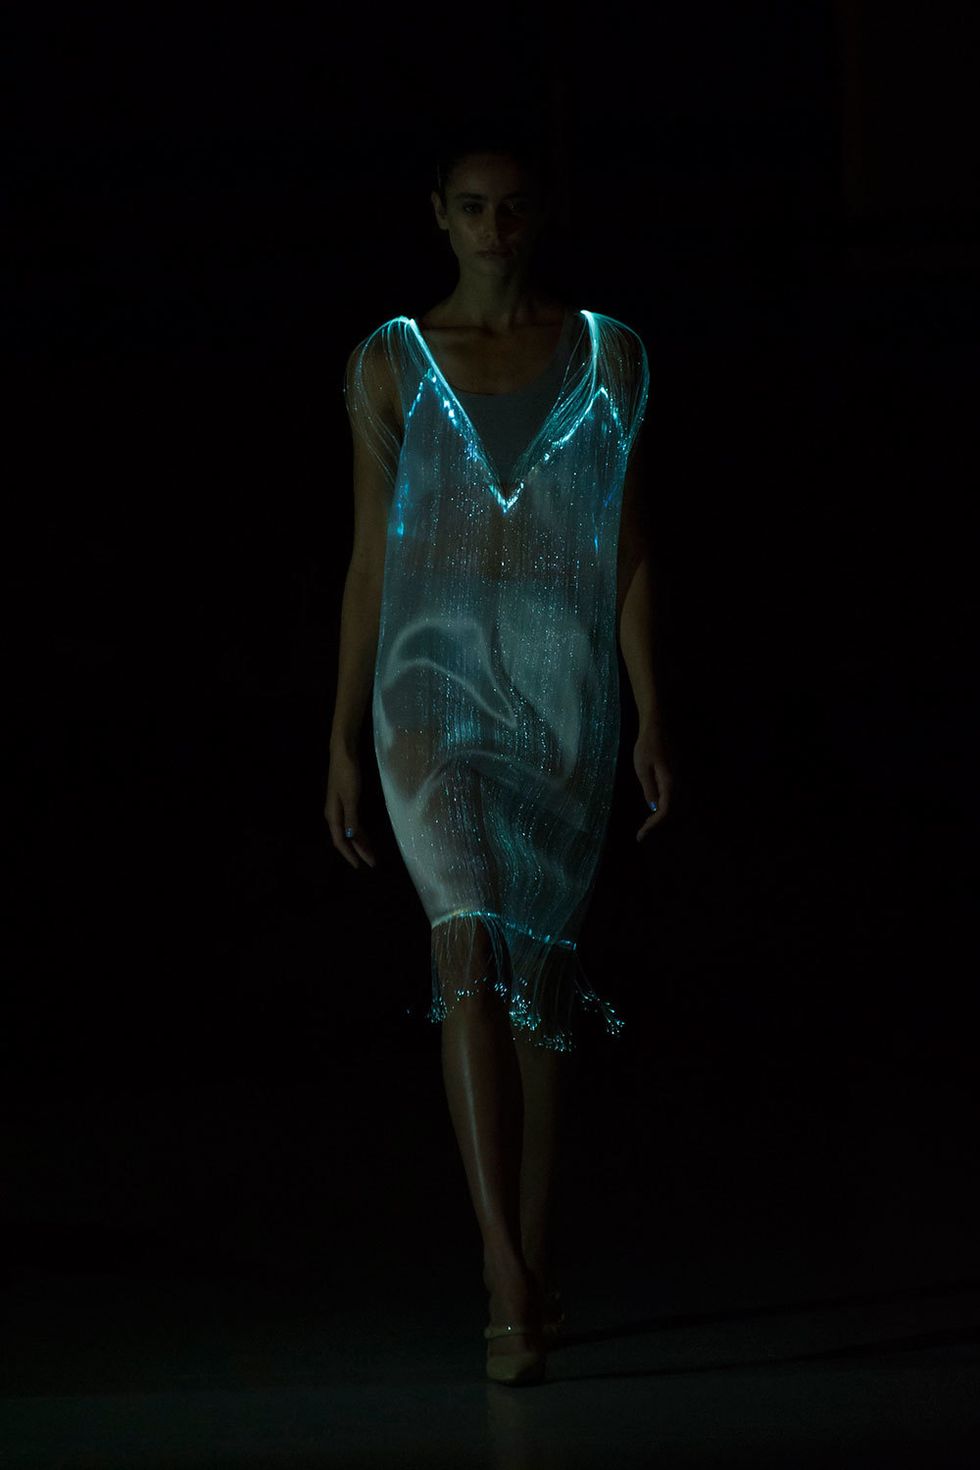 Darkness, One-piece garment, Electric blue, Flash photography, Fashion model, Barefoot, Waist, Fashion design, Ankle, Model, 